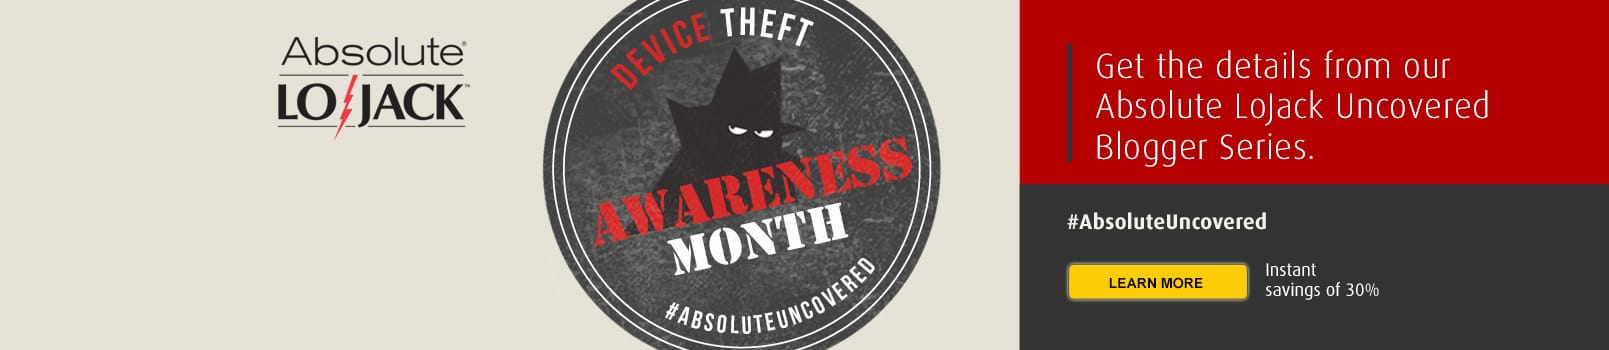 Device Theft Awareness Month - Absolute LoJack Uncovered